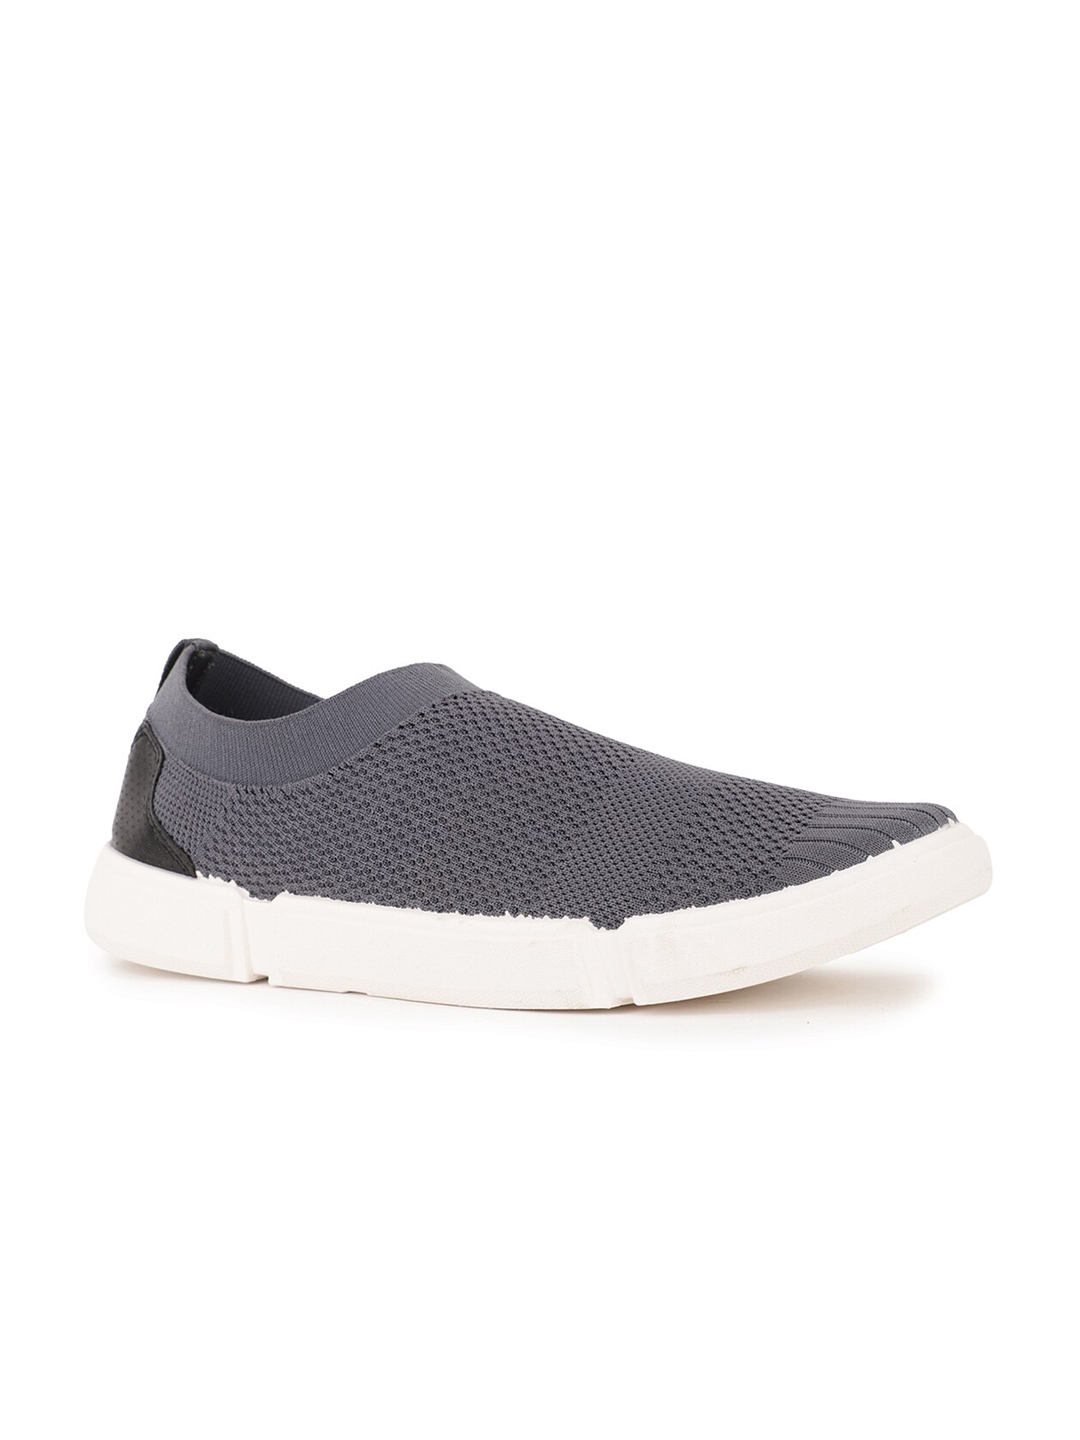 Buy North Star Men Grey Woven Design Slip On Sneakers - Casual Shoes ...